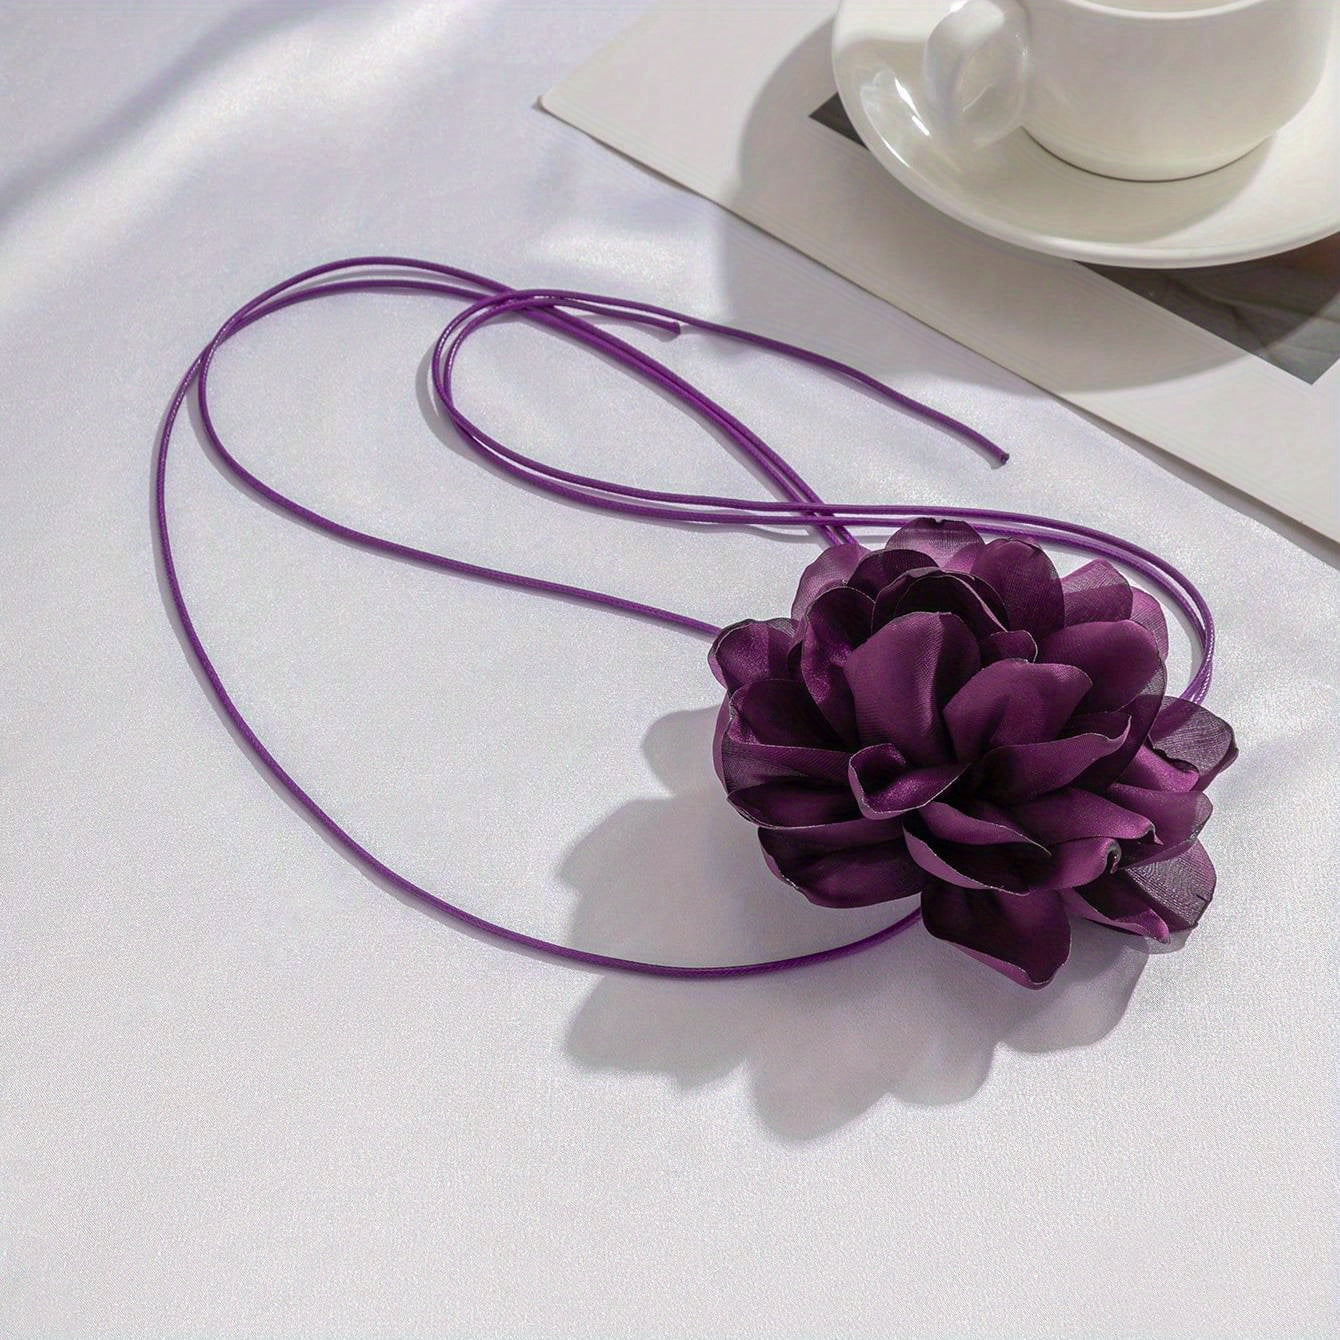 Elegant French Vintage Flower Necklace - Romantic Long Strap Design with Wax Cord